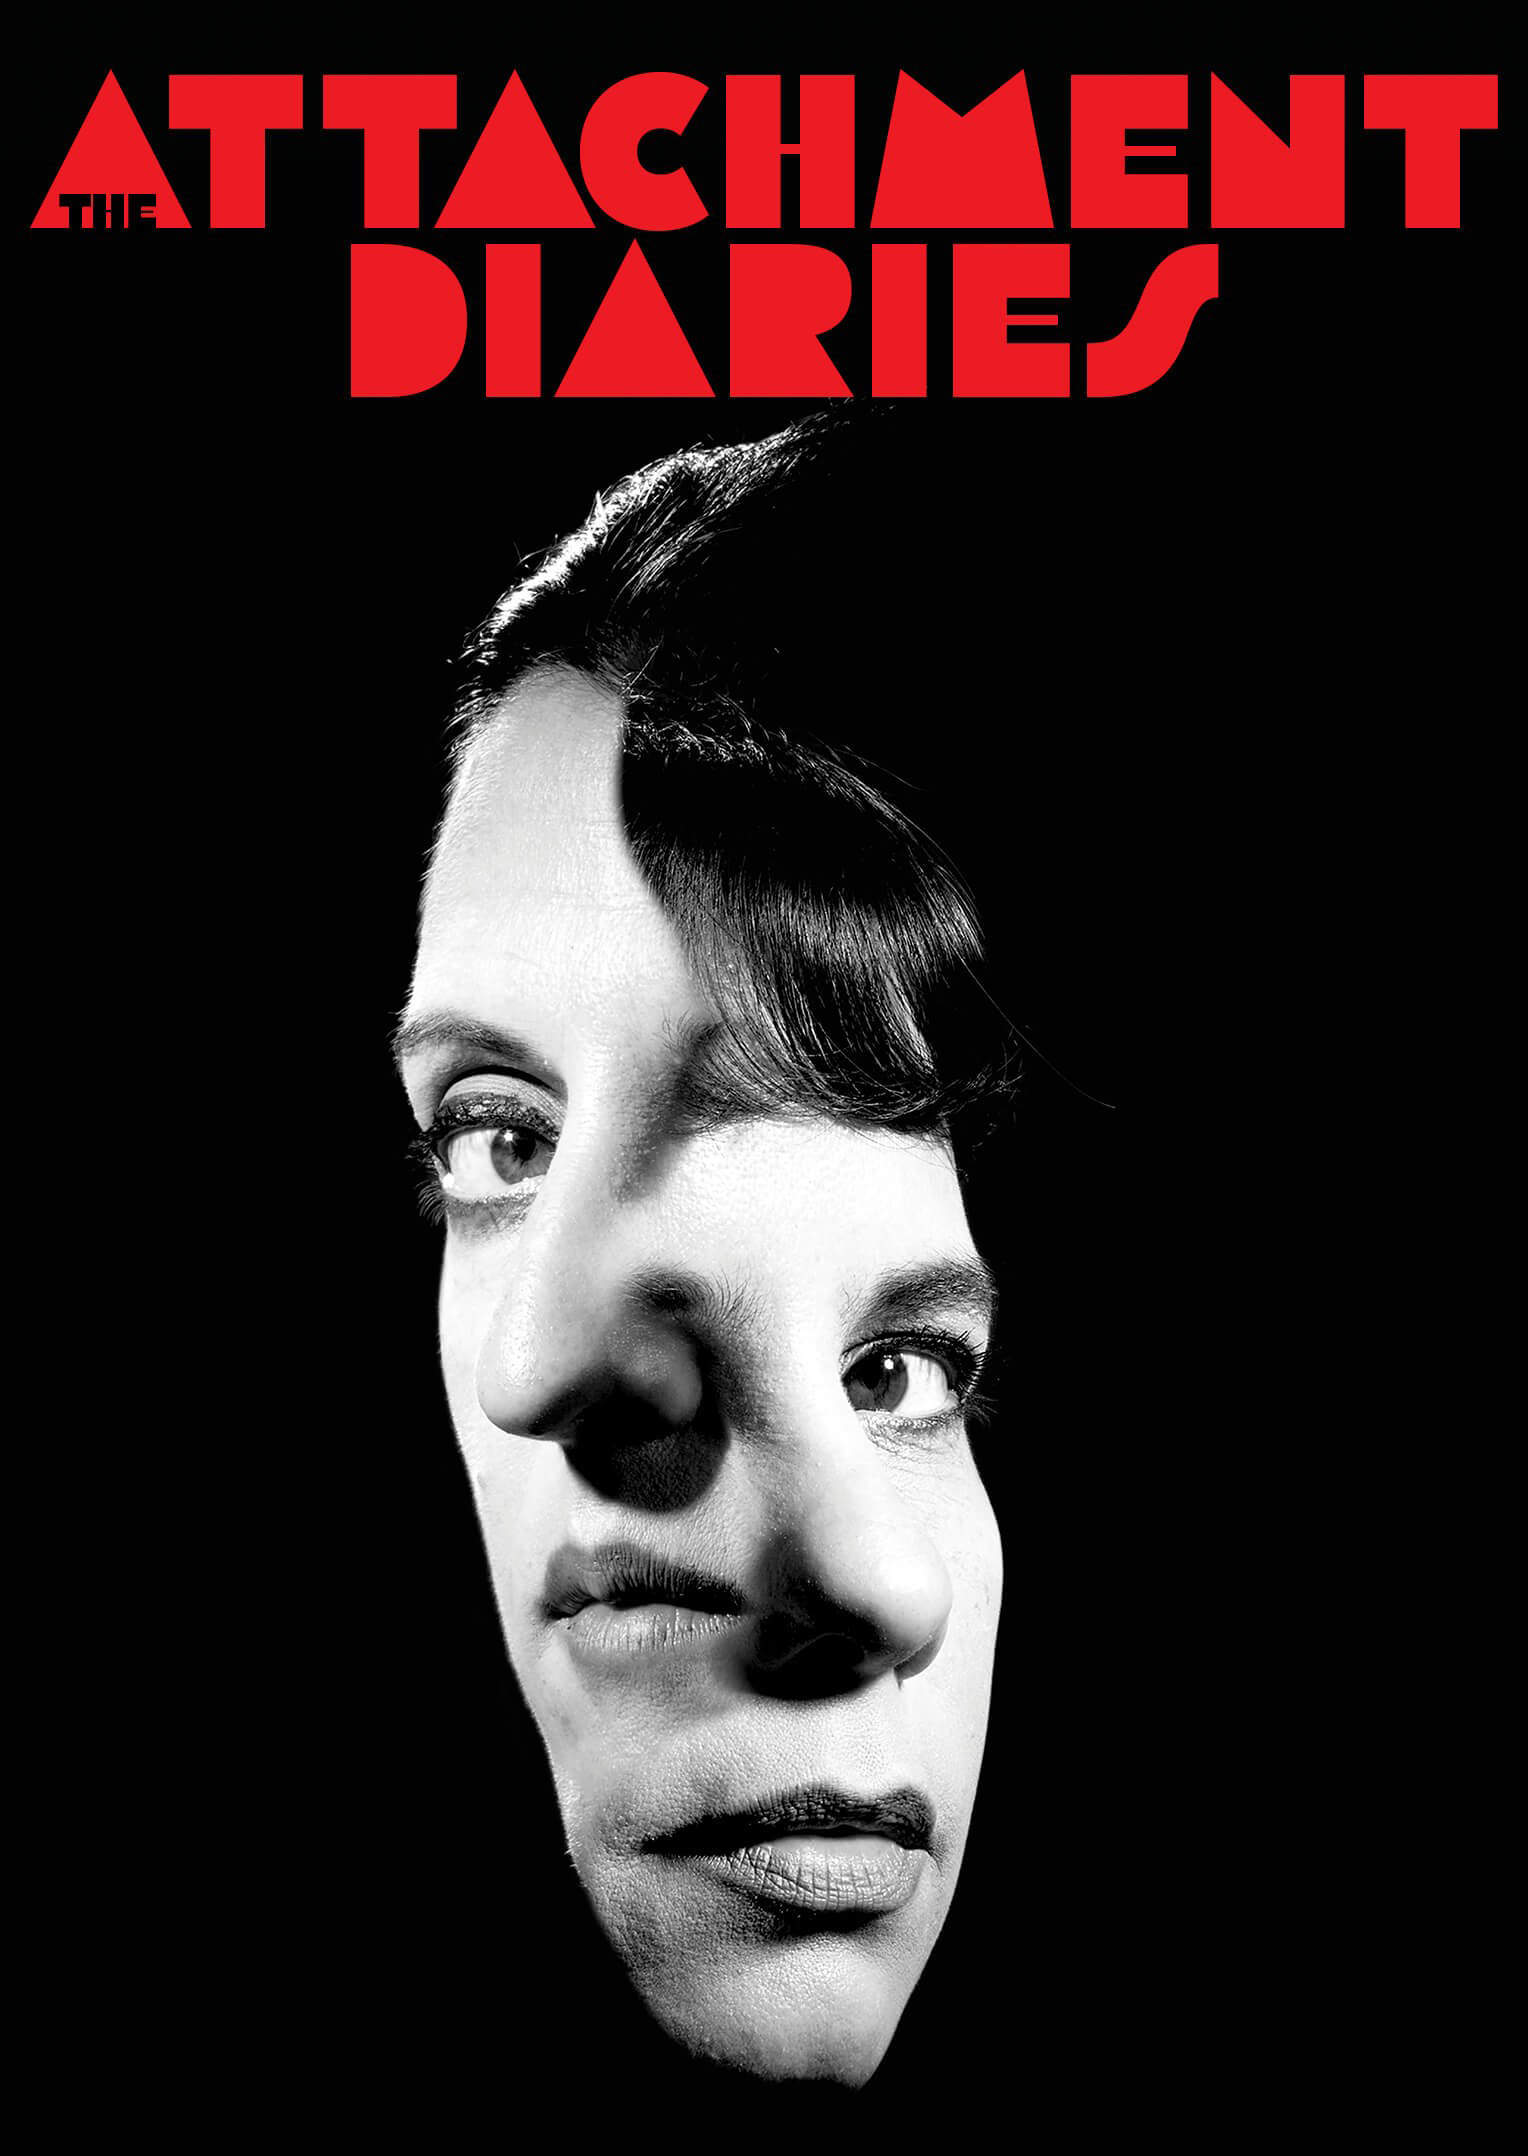 Mark Your Calendars for Dark Sky Films' Release of The Attachment Diaries on 4/21 46